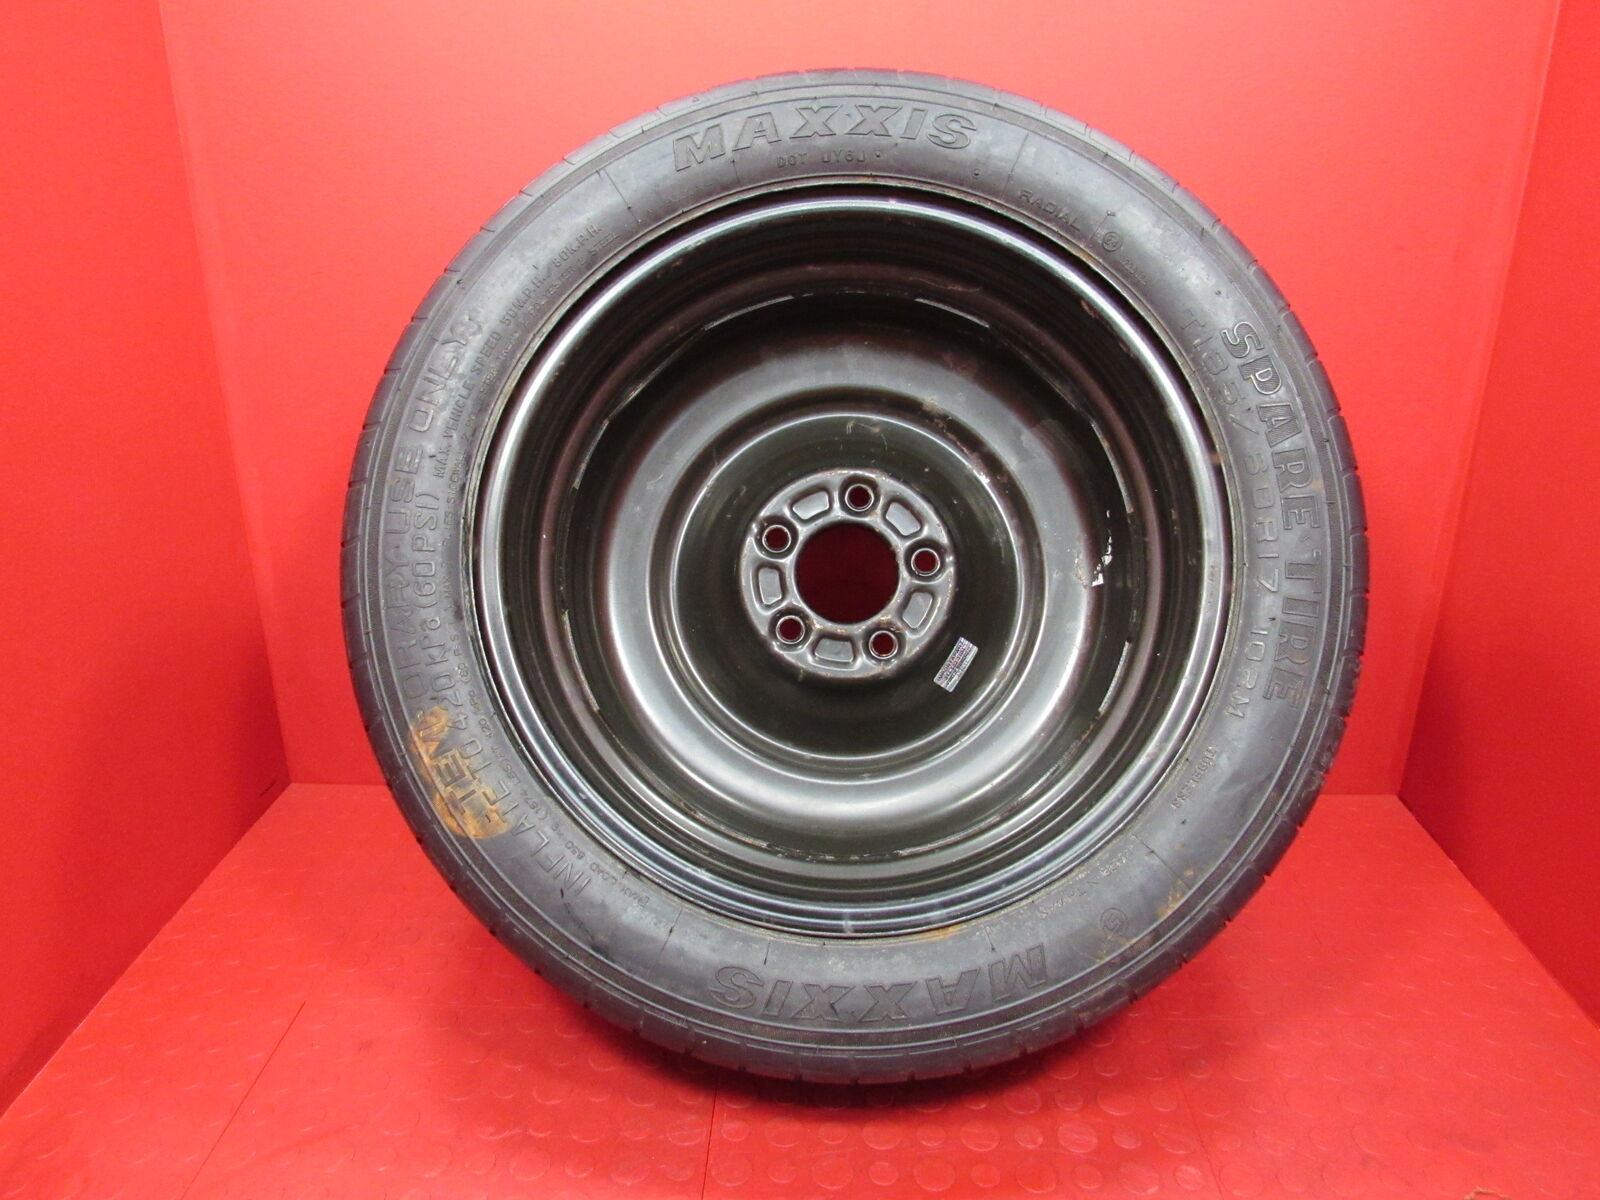 https://www.importapart.com/wp-content/uploads/imported/2/10-14-Ford-Mustang-17x5-Steel-Spare-Tire-Wheel-Donut-Compact-Space-Saver-4611-325126425712-6.jpg